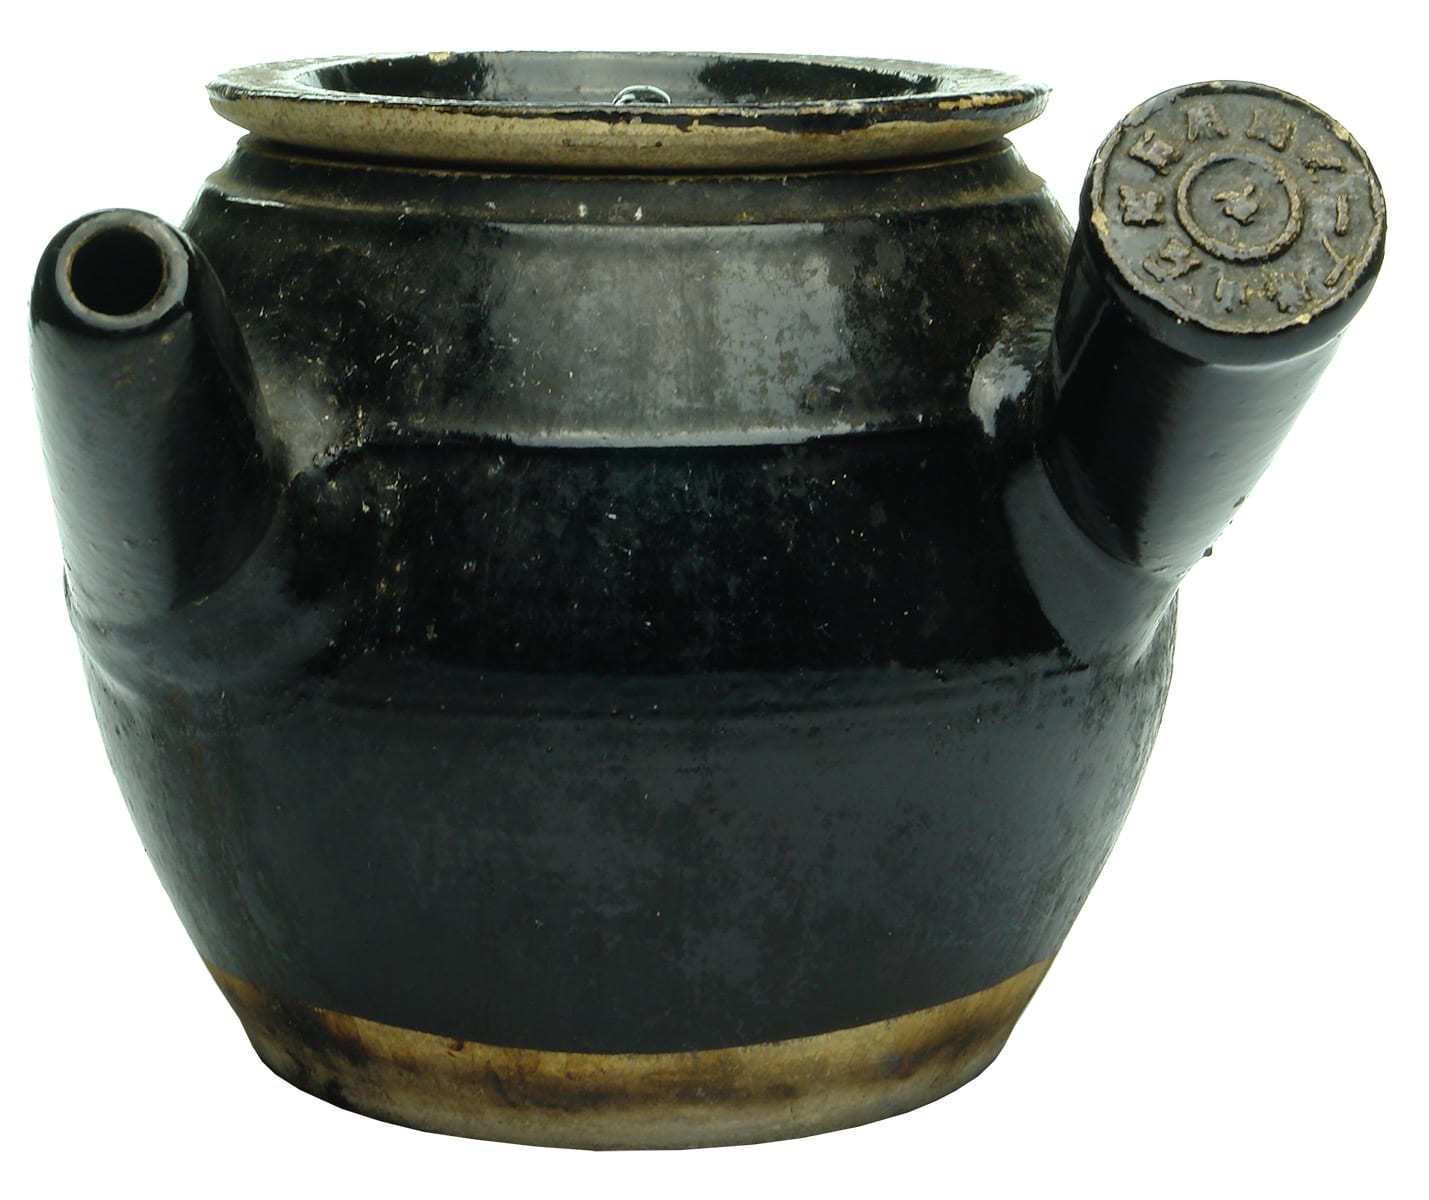 Handled Chinese Cooking Pot